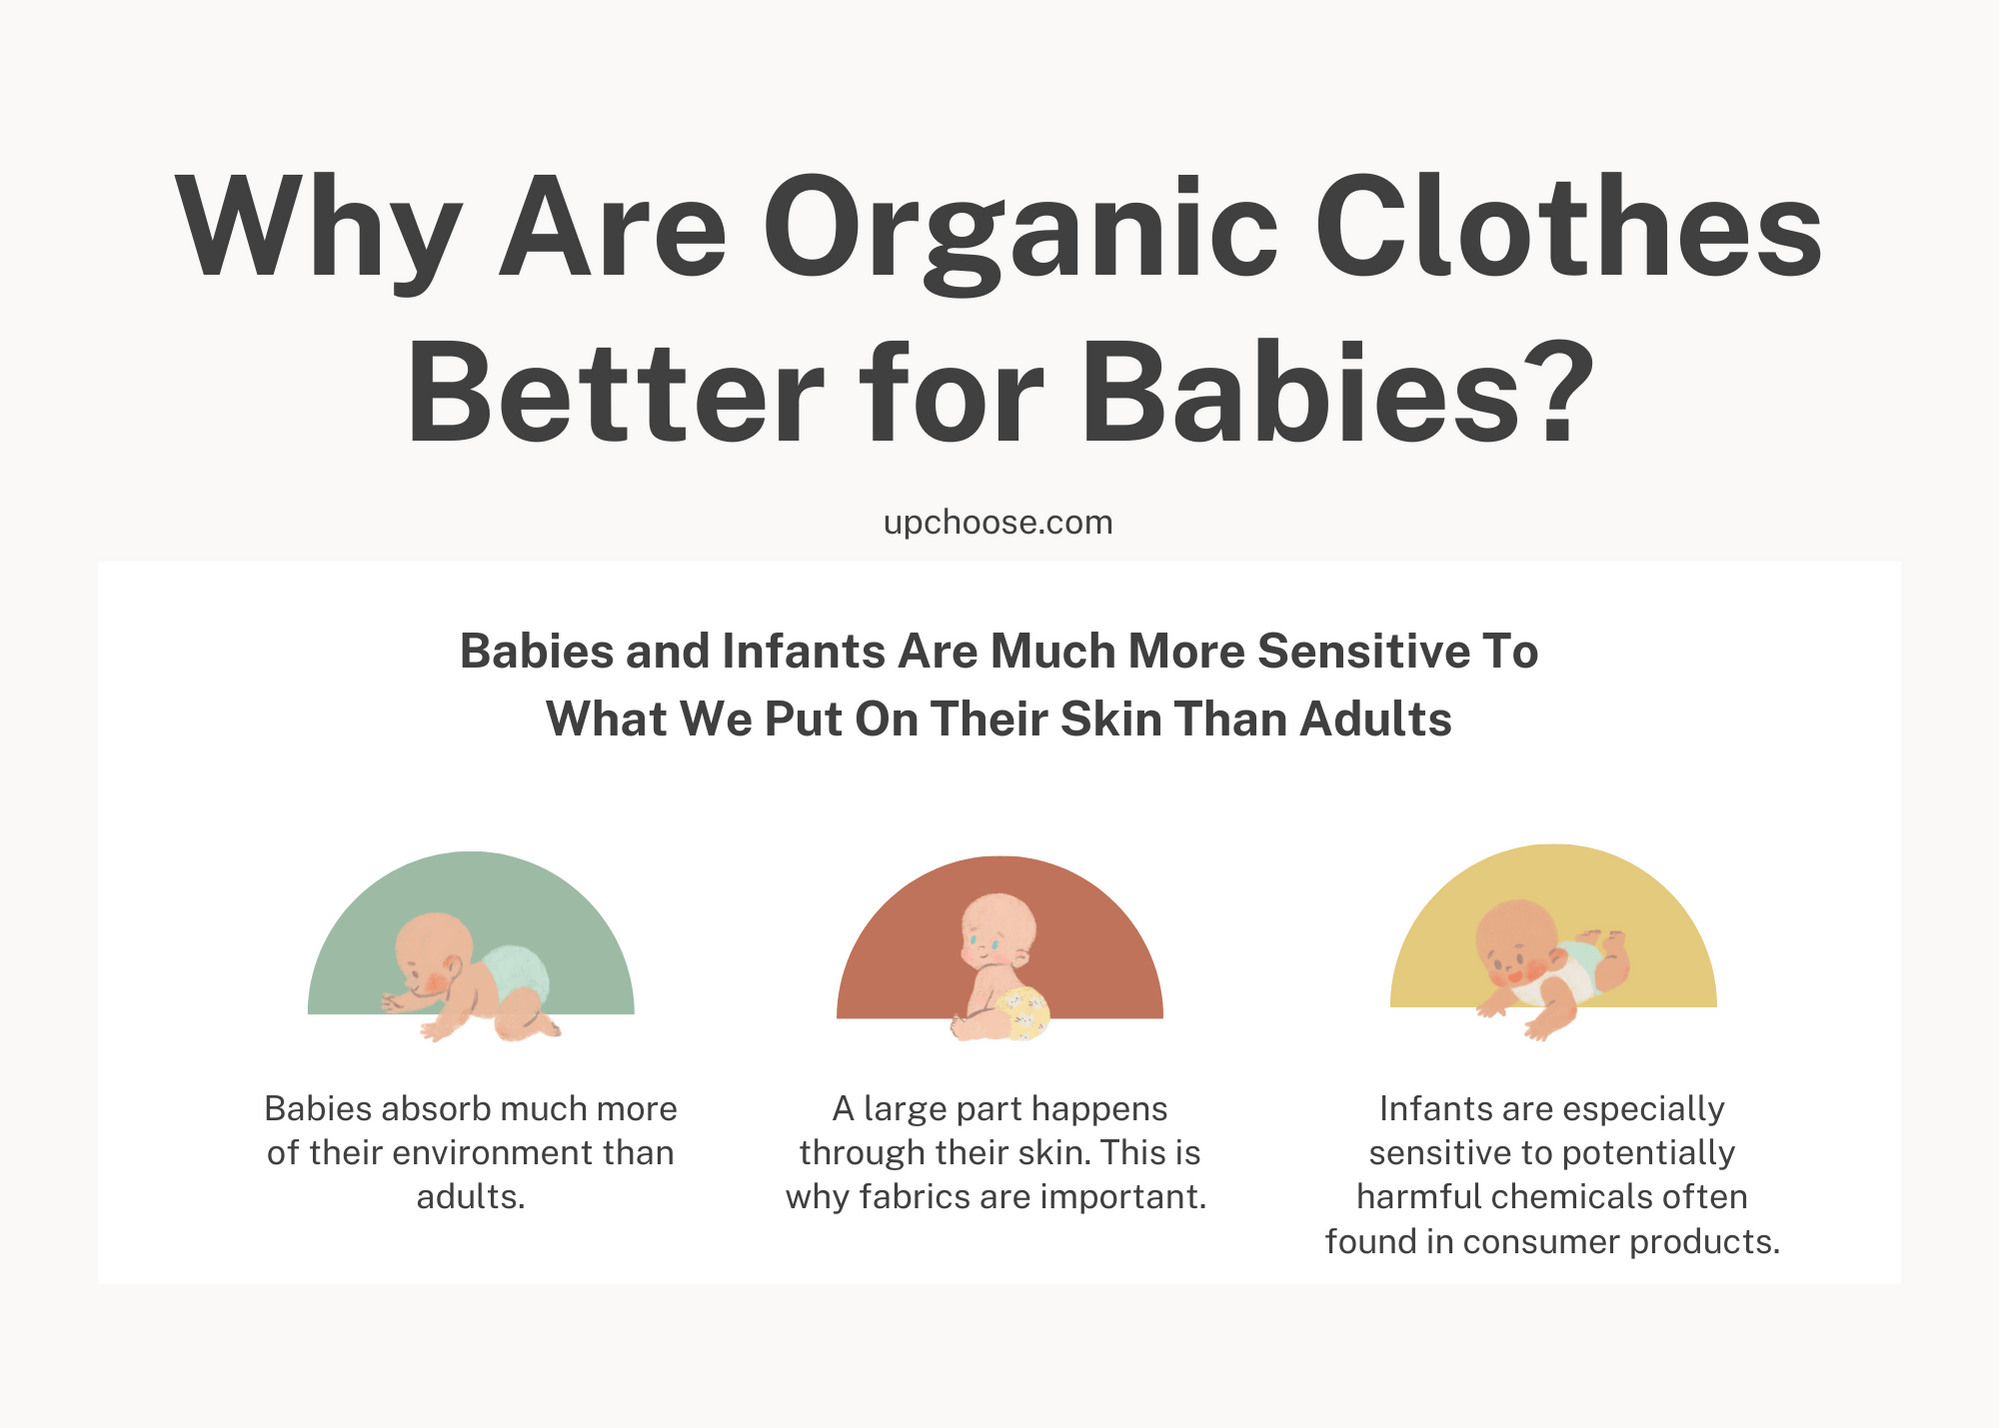 Infographic organic cotton upchoose cover photo